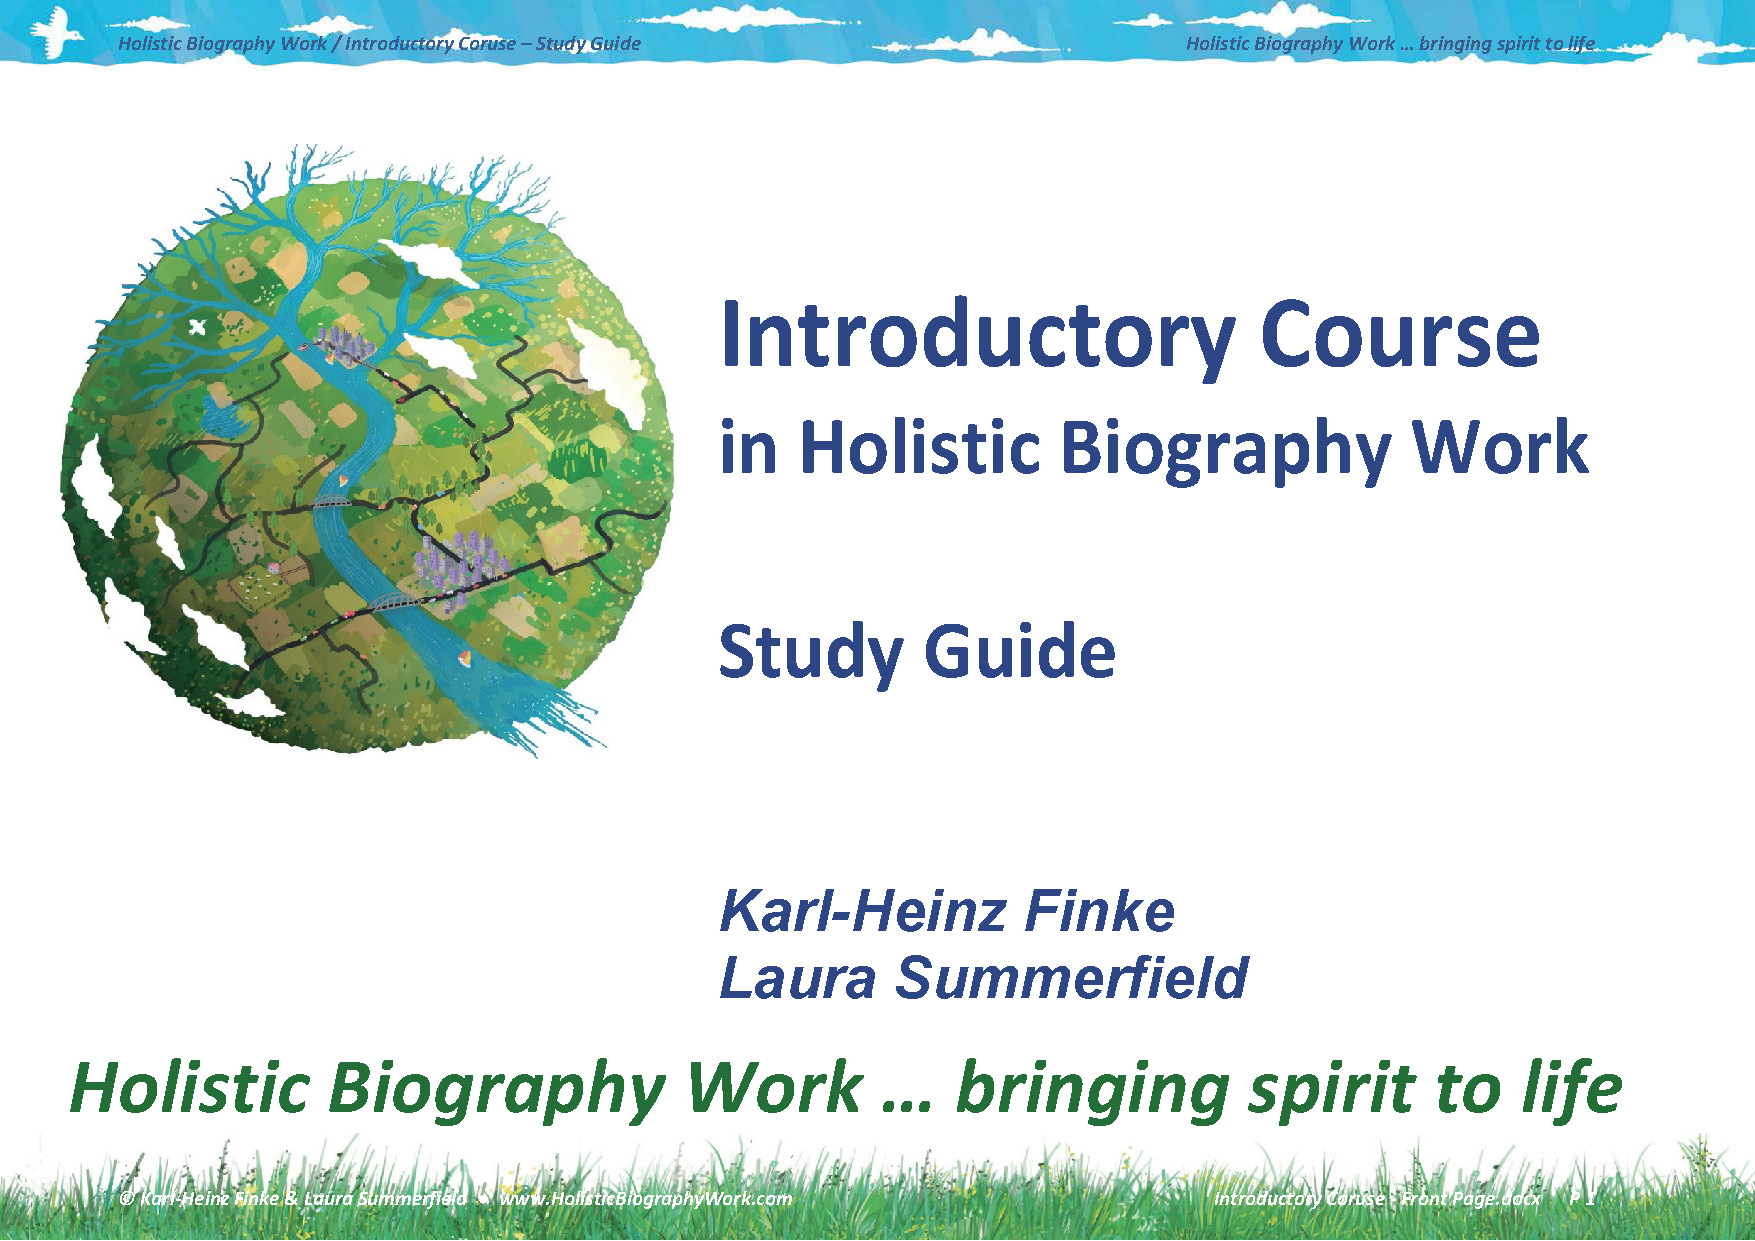 Introductory Course - Study Guide